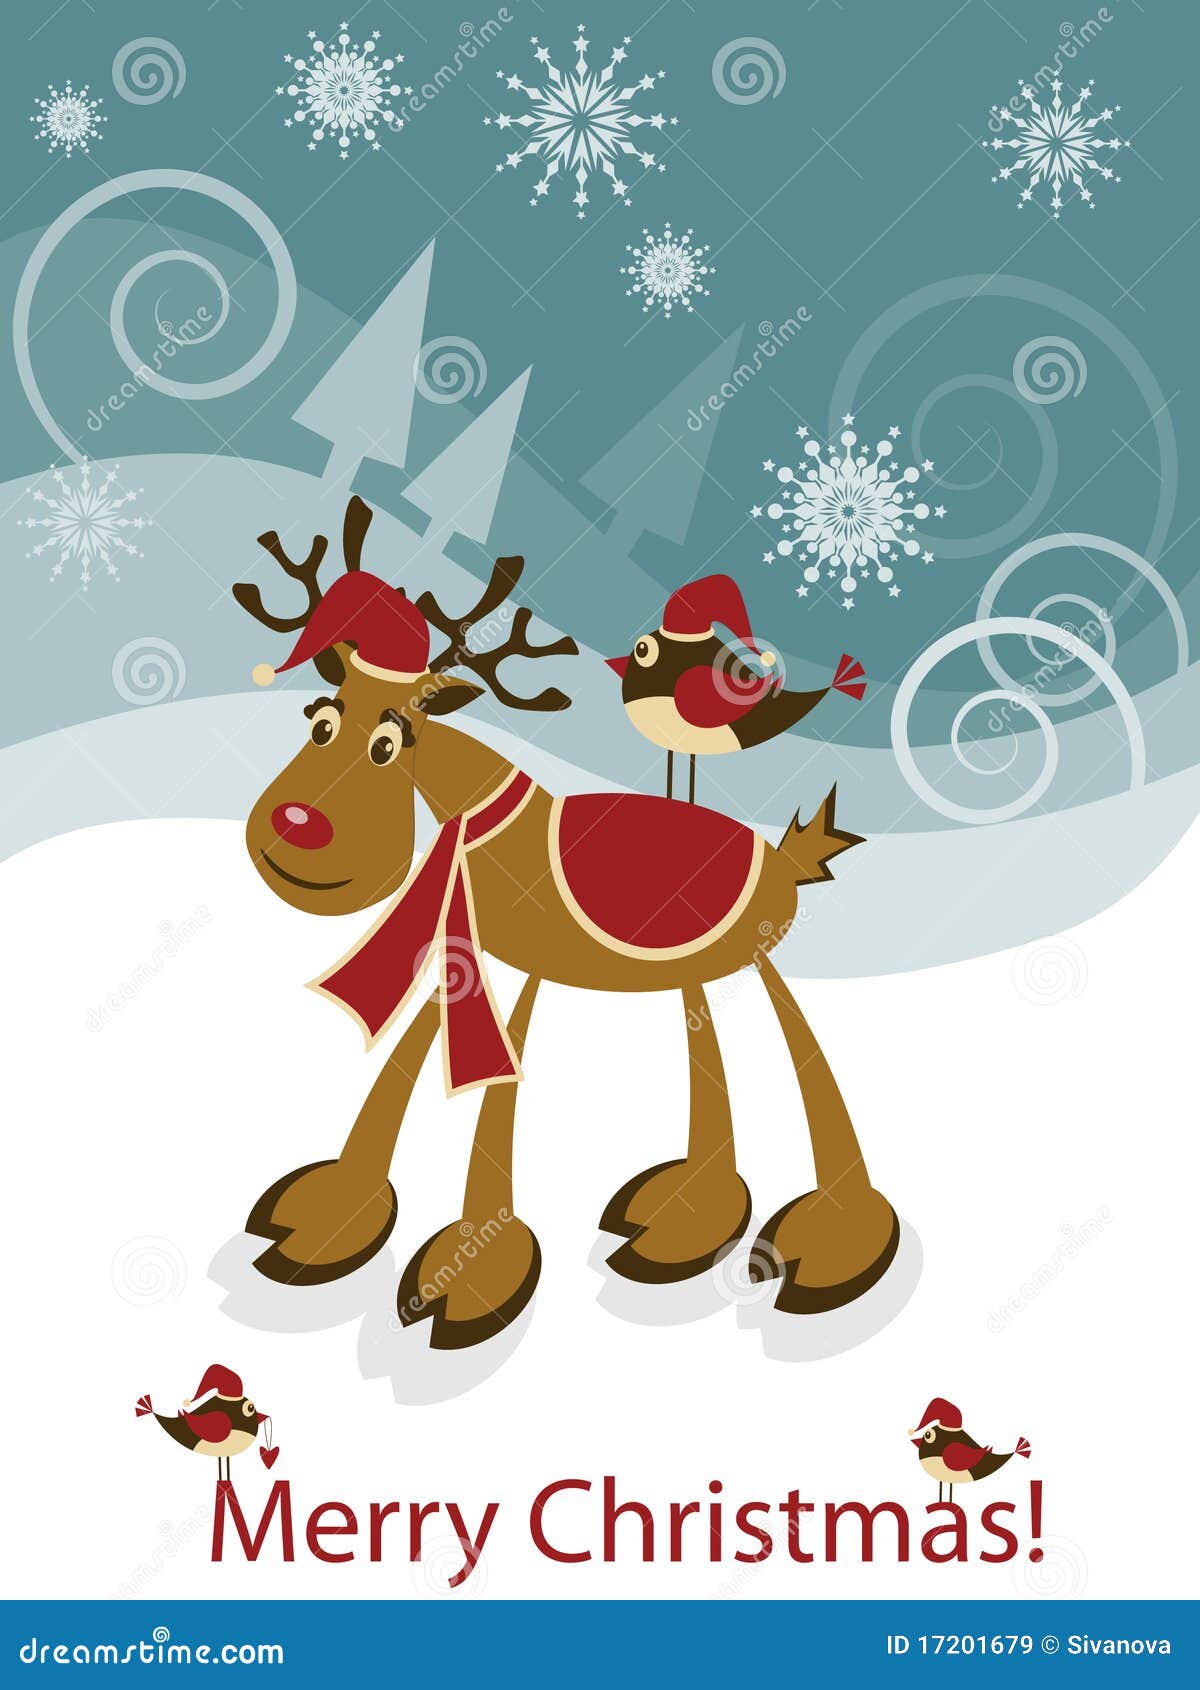 Greeteng Card with Funny Christmas Deer and Bird Stock Vector -  Illustration of design, december: 17201679